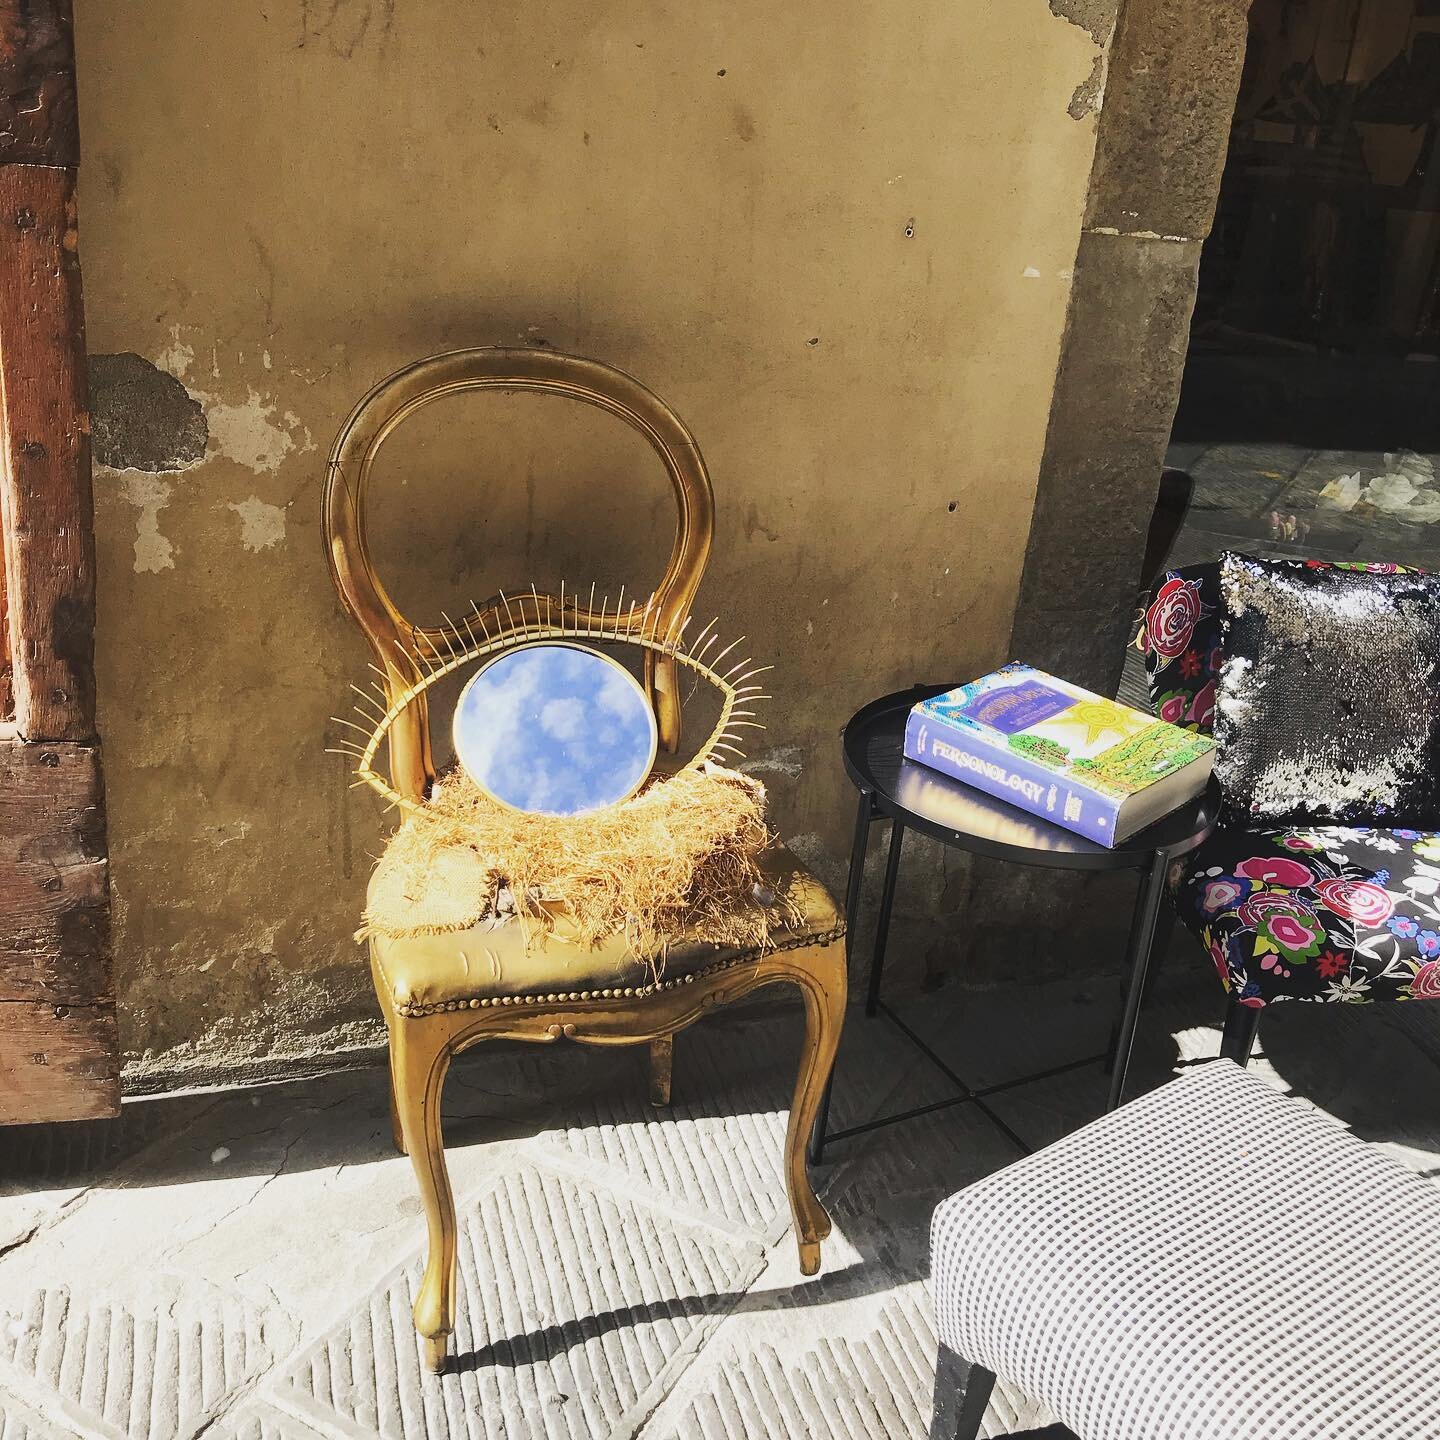 Arezzo antique market October 6, 2019. Such a charming little city just an hour or so by train from Florence.